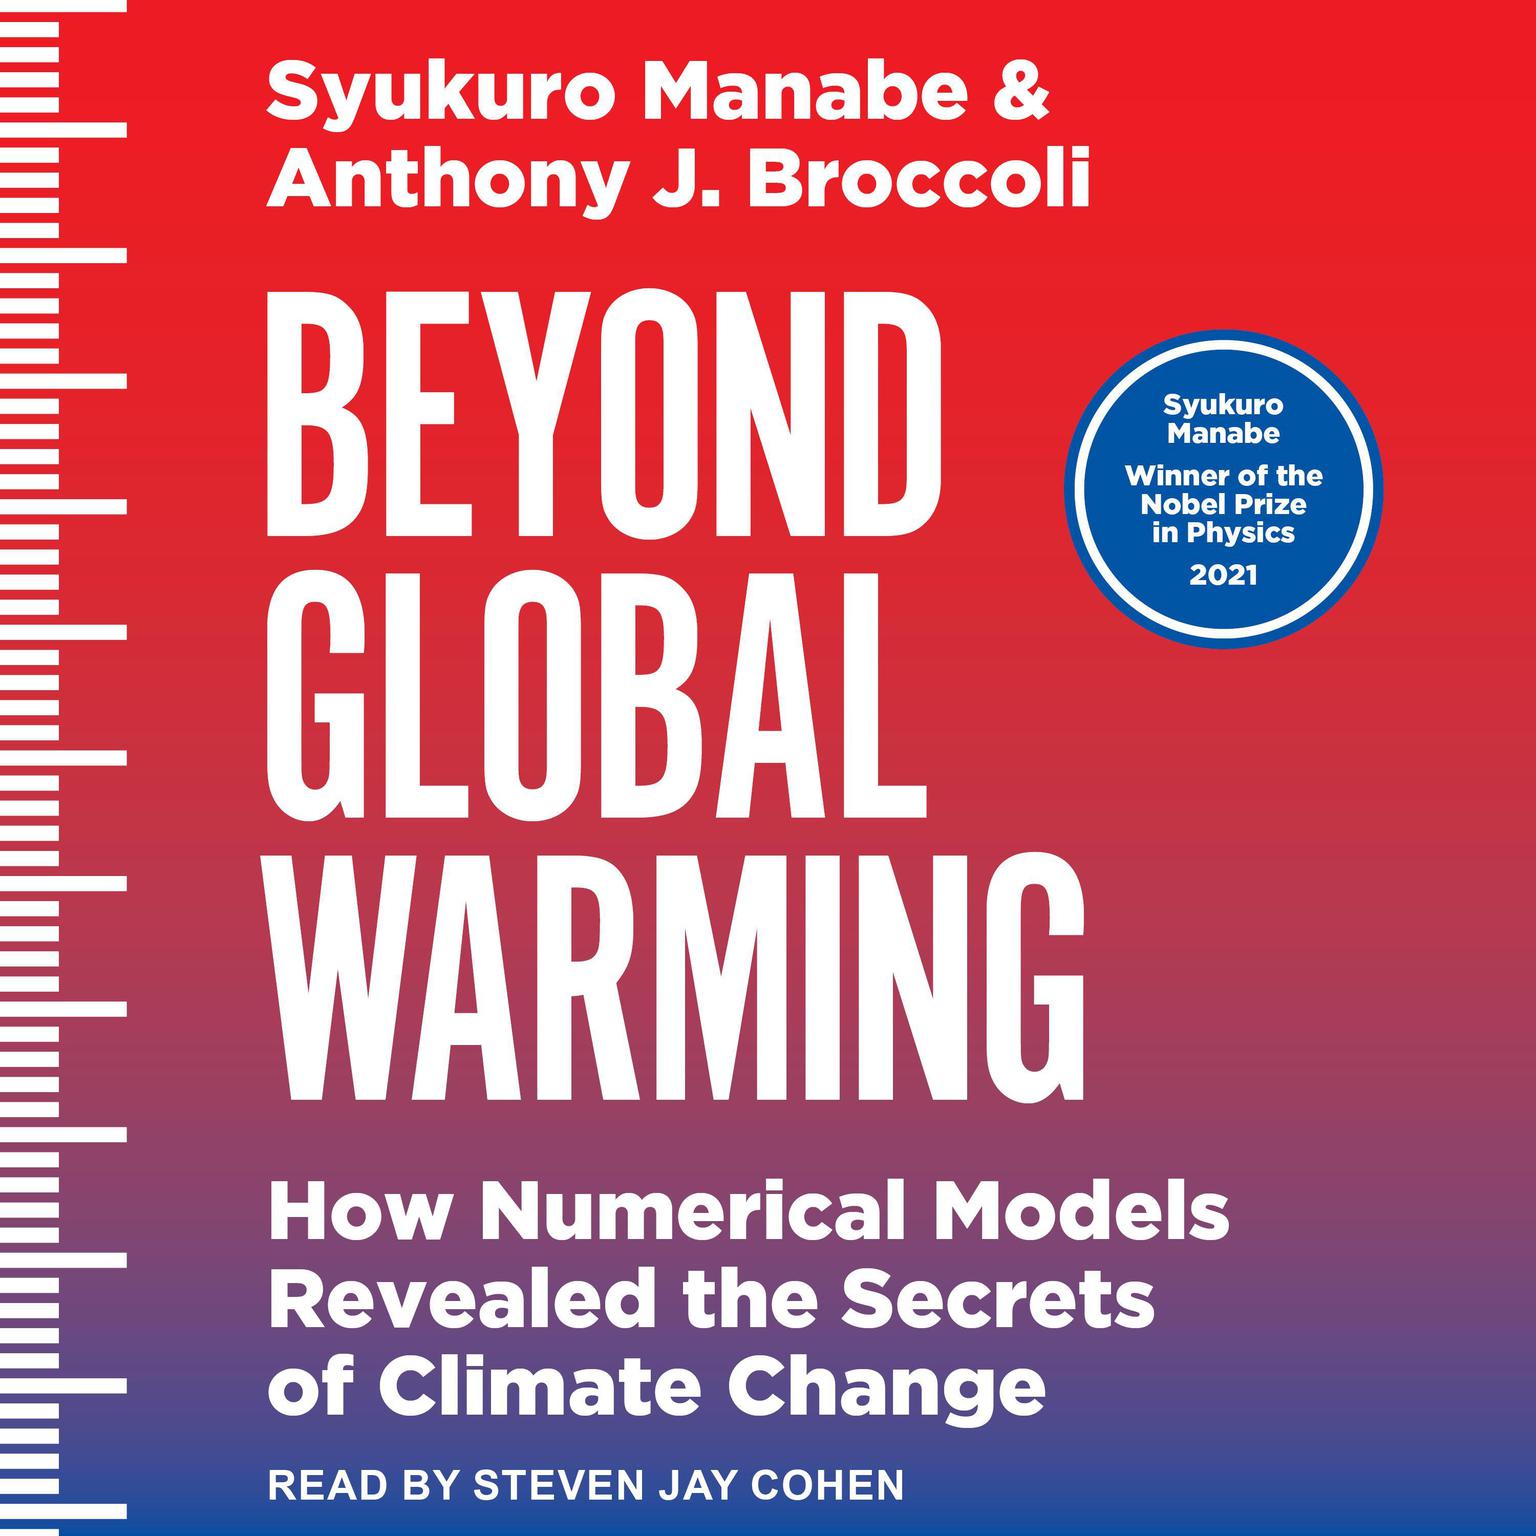 Beyond Global Warming: How Numerical Models Revealed the Secrets of Climate Change Audiobook, by Anthony J. Broccoli